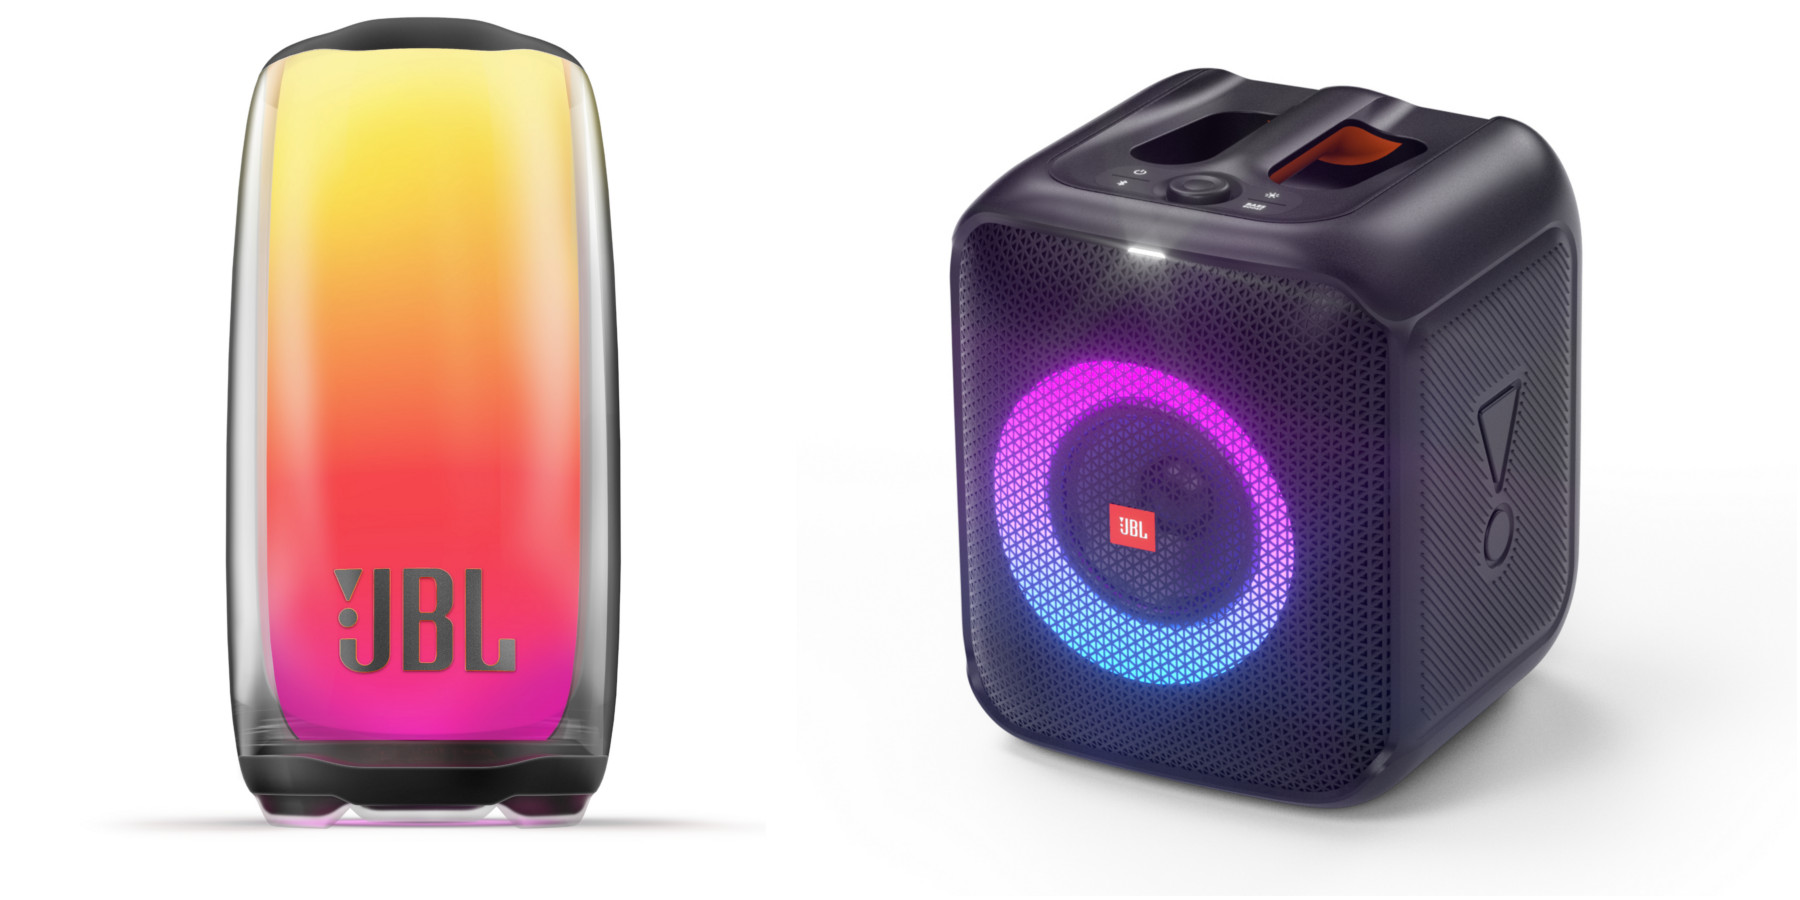 New JBL speakers Boombox 3, Pulse 5, and more 9to5Toys